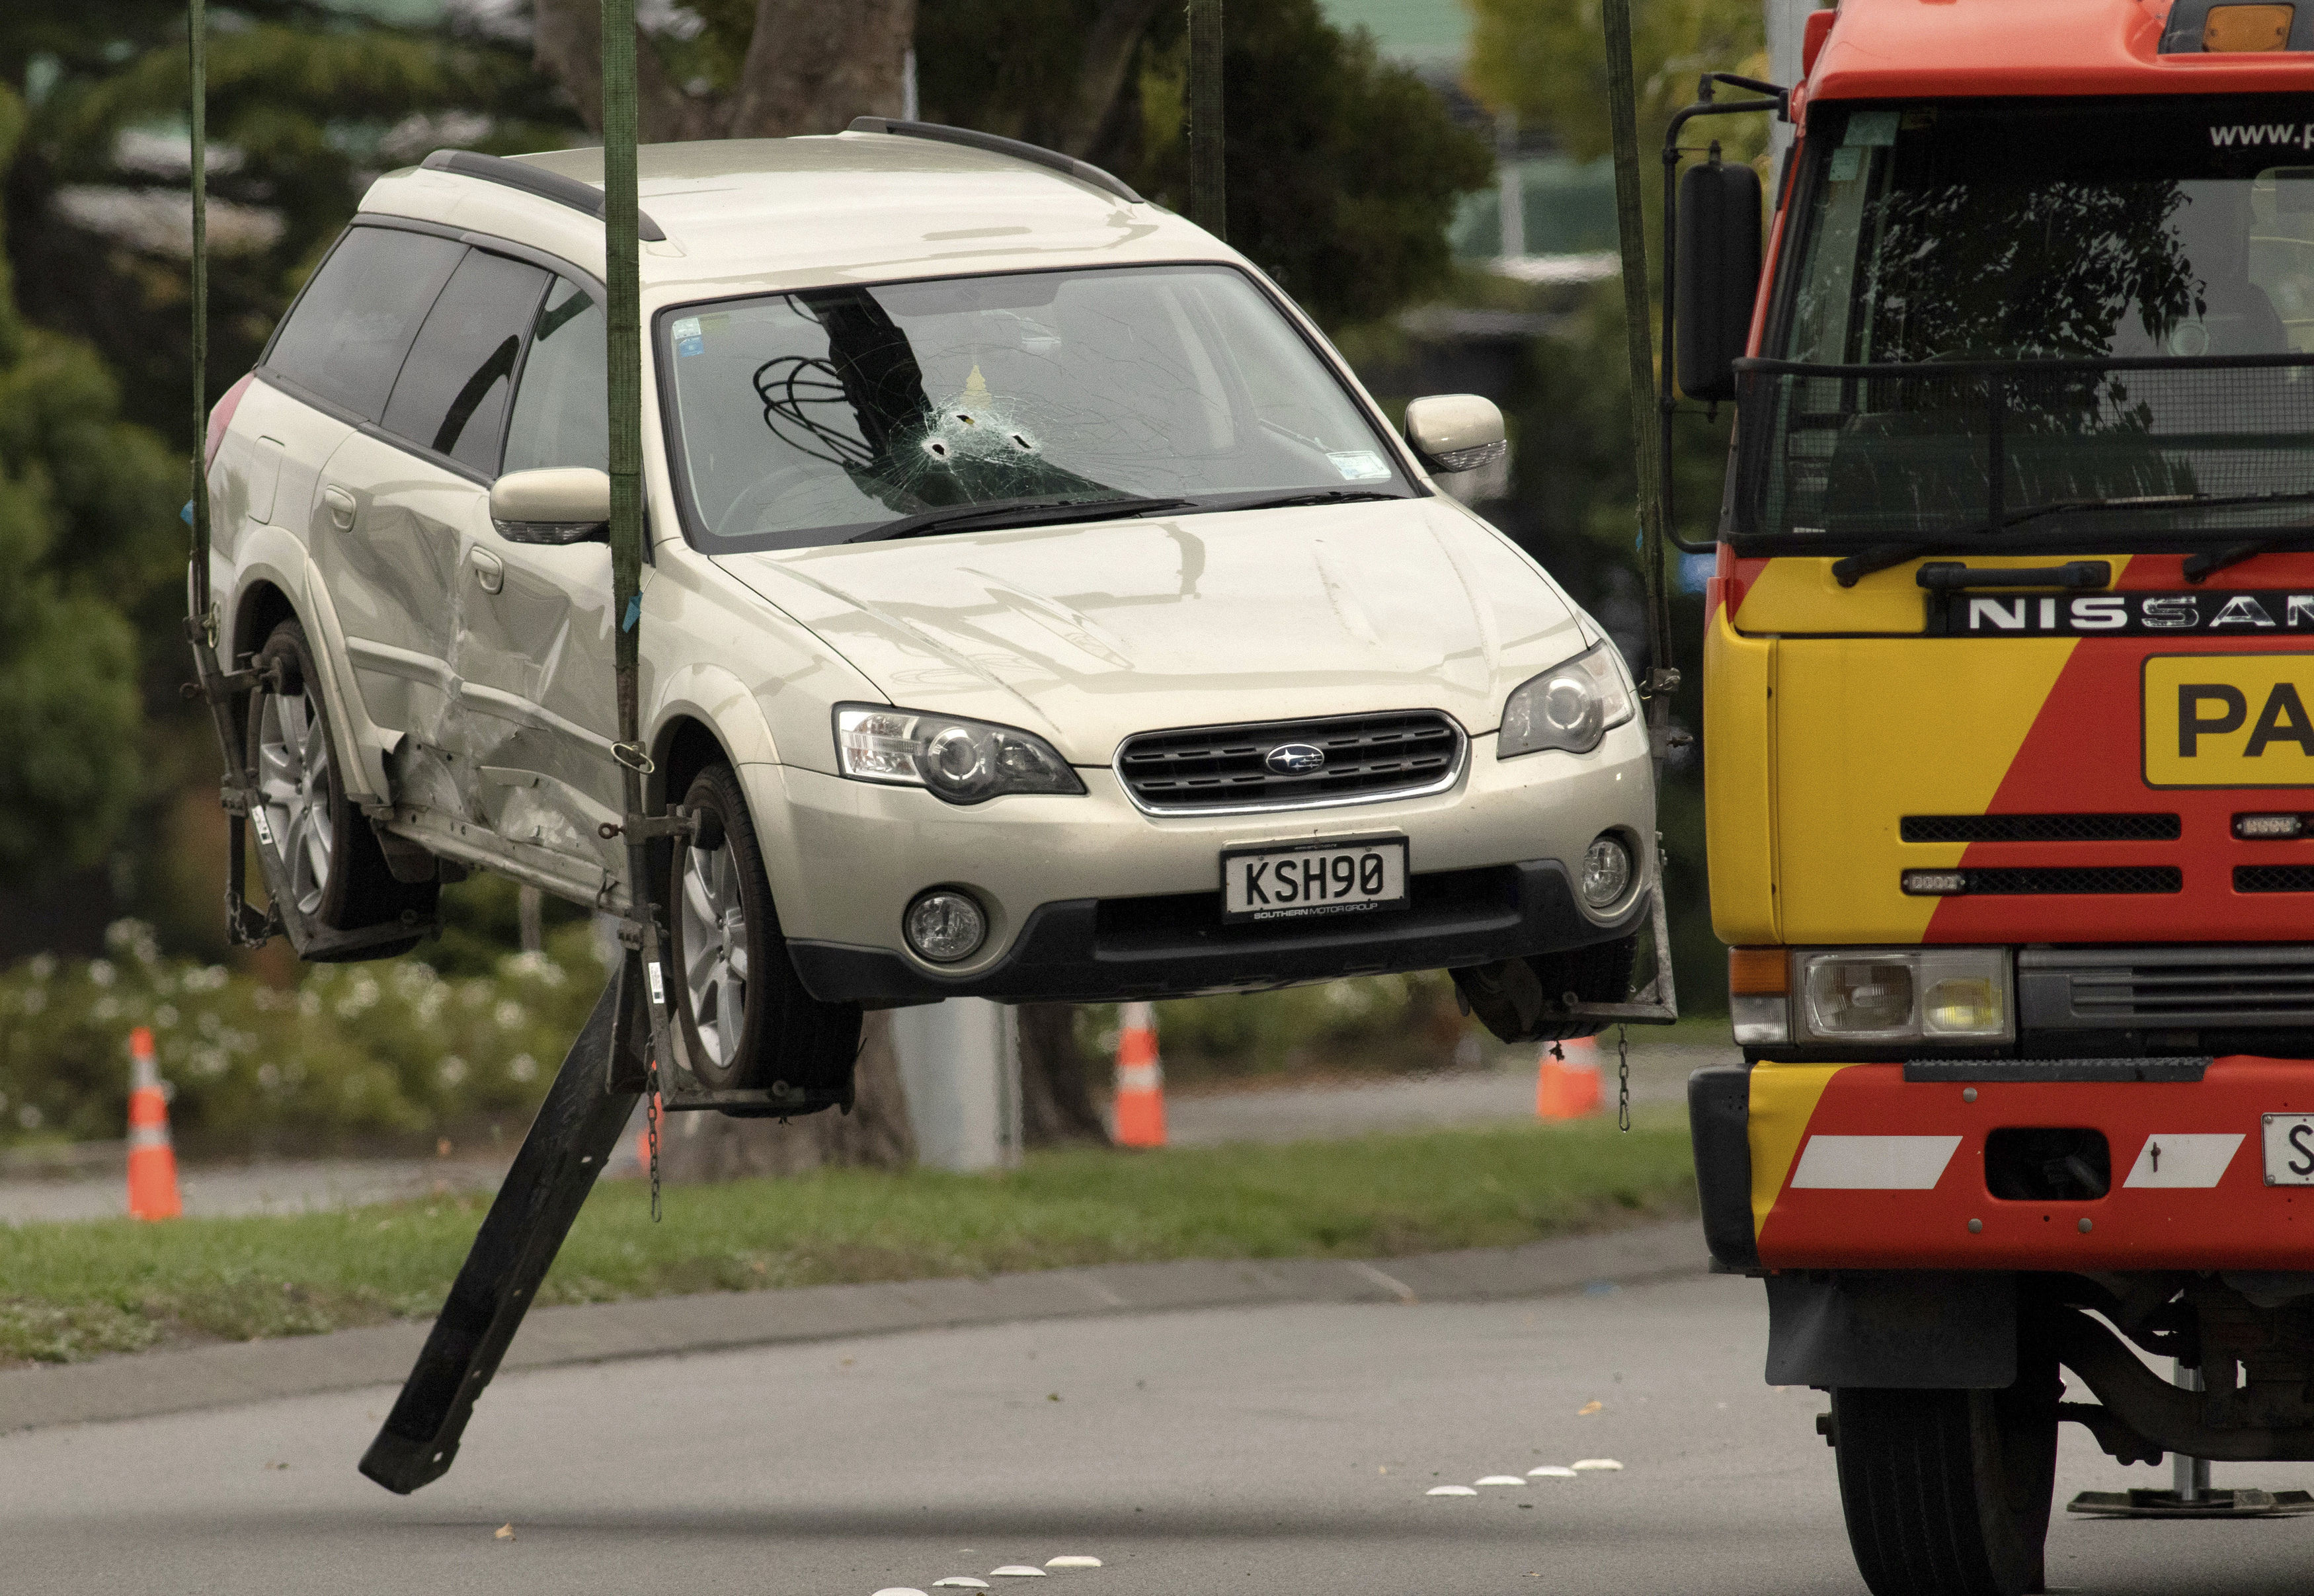 A car thought to be used by the suspect in the Christchurch mosque shootings is lifted onto a tow truck 